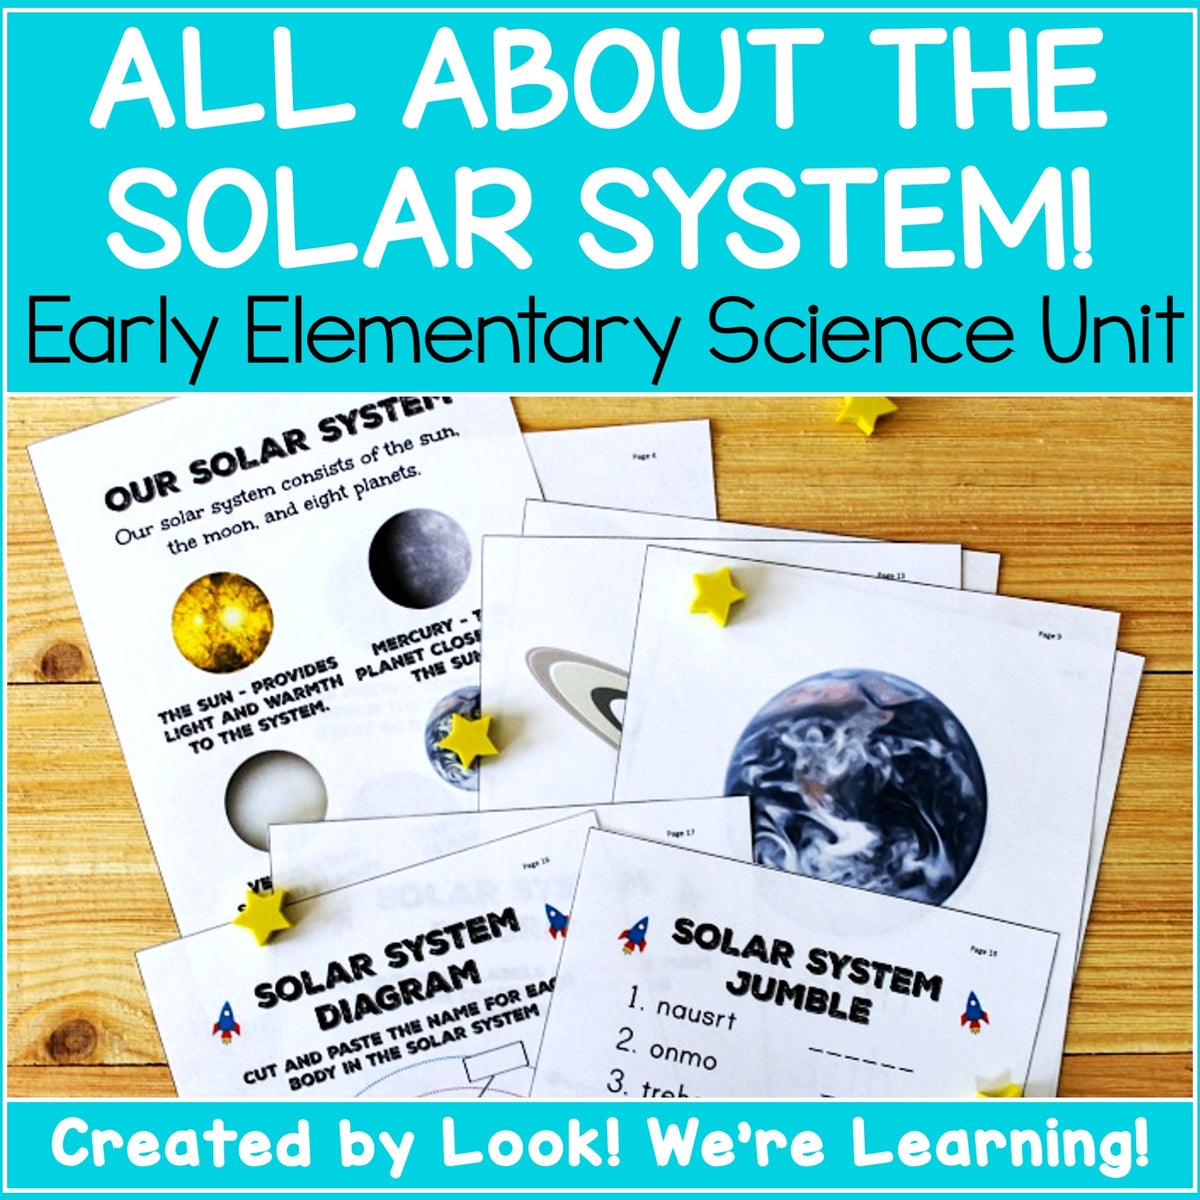 Free Printable Solar System Flashcards - Look! We're Learning!